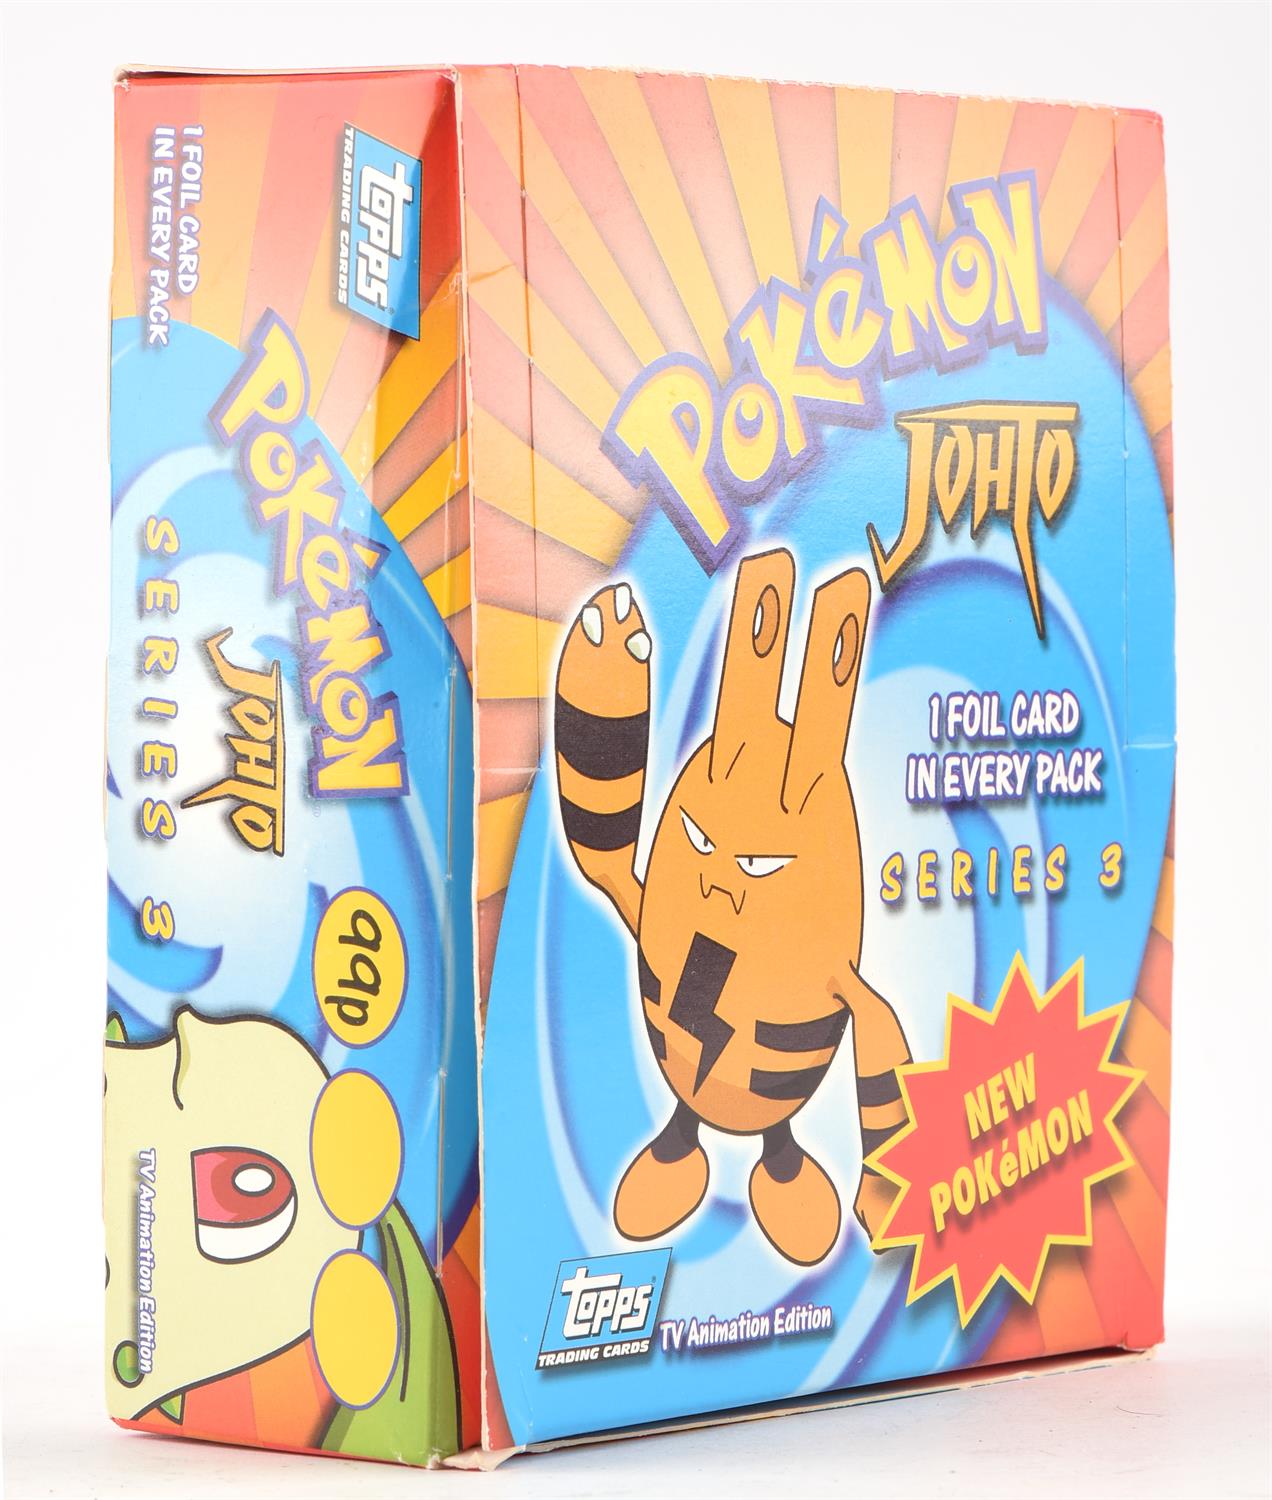 Pokemon TCG. Topps Johto series 3 opened booster box containing 24 sealed packs. Provenance: The - Image 5 of 9